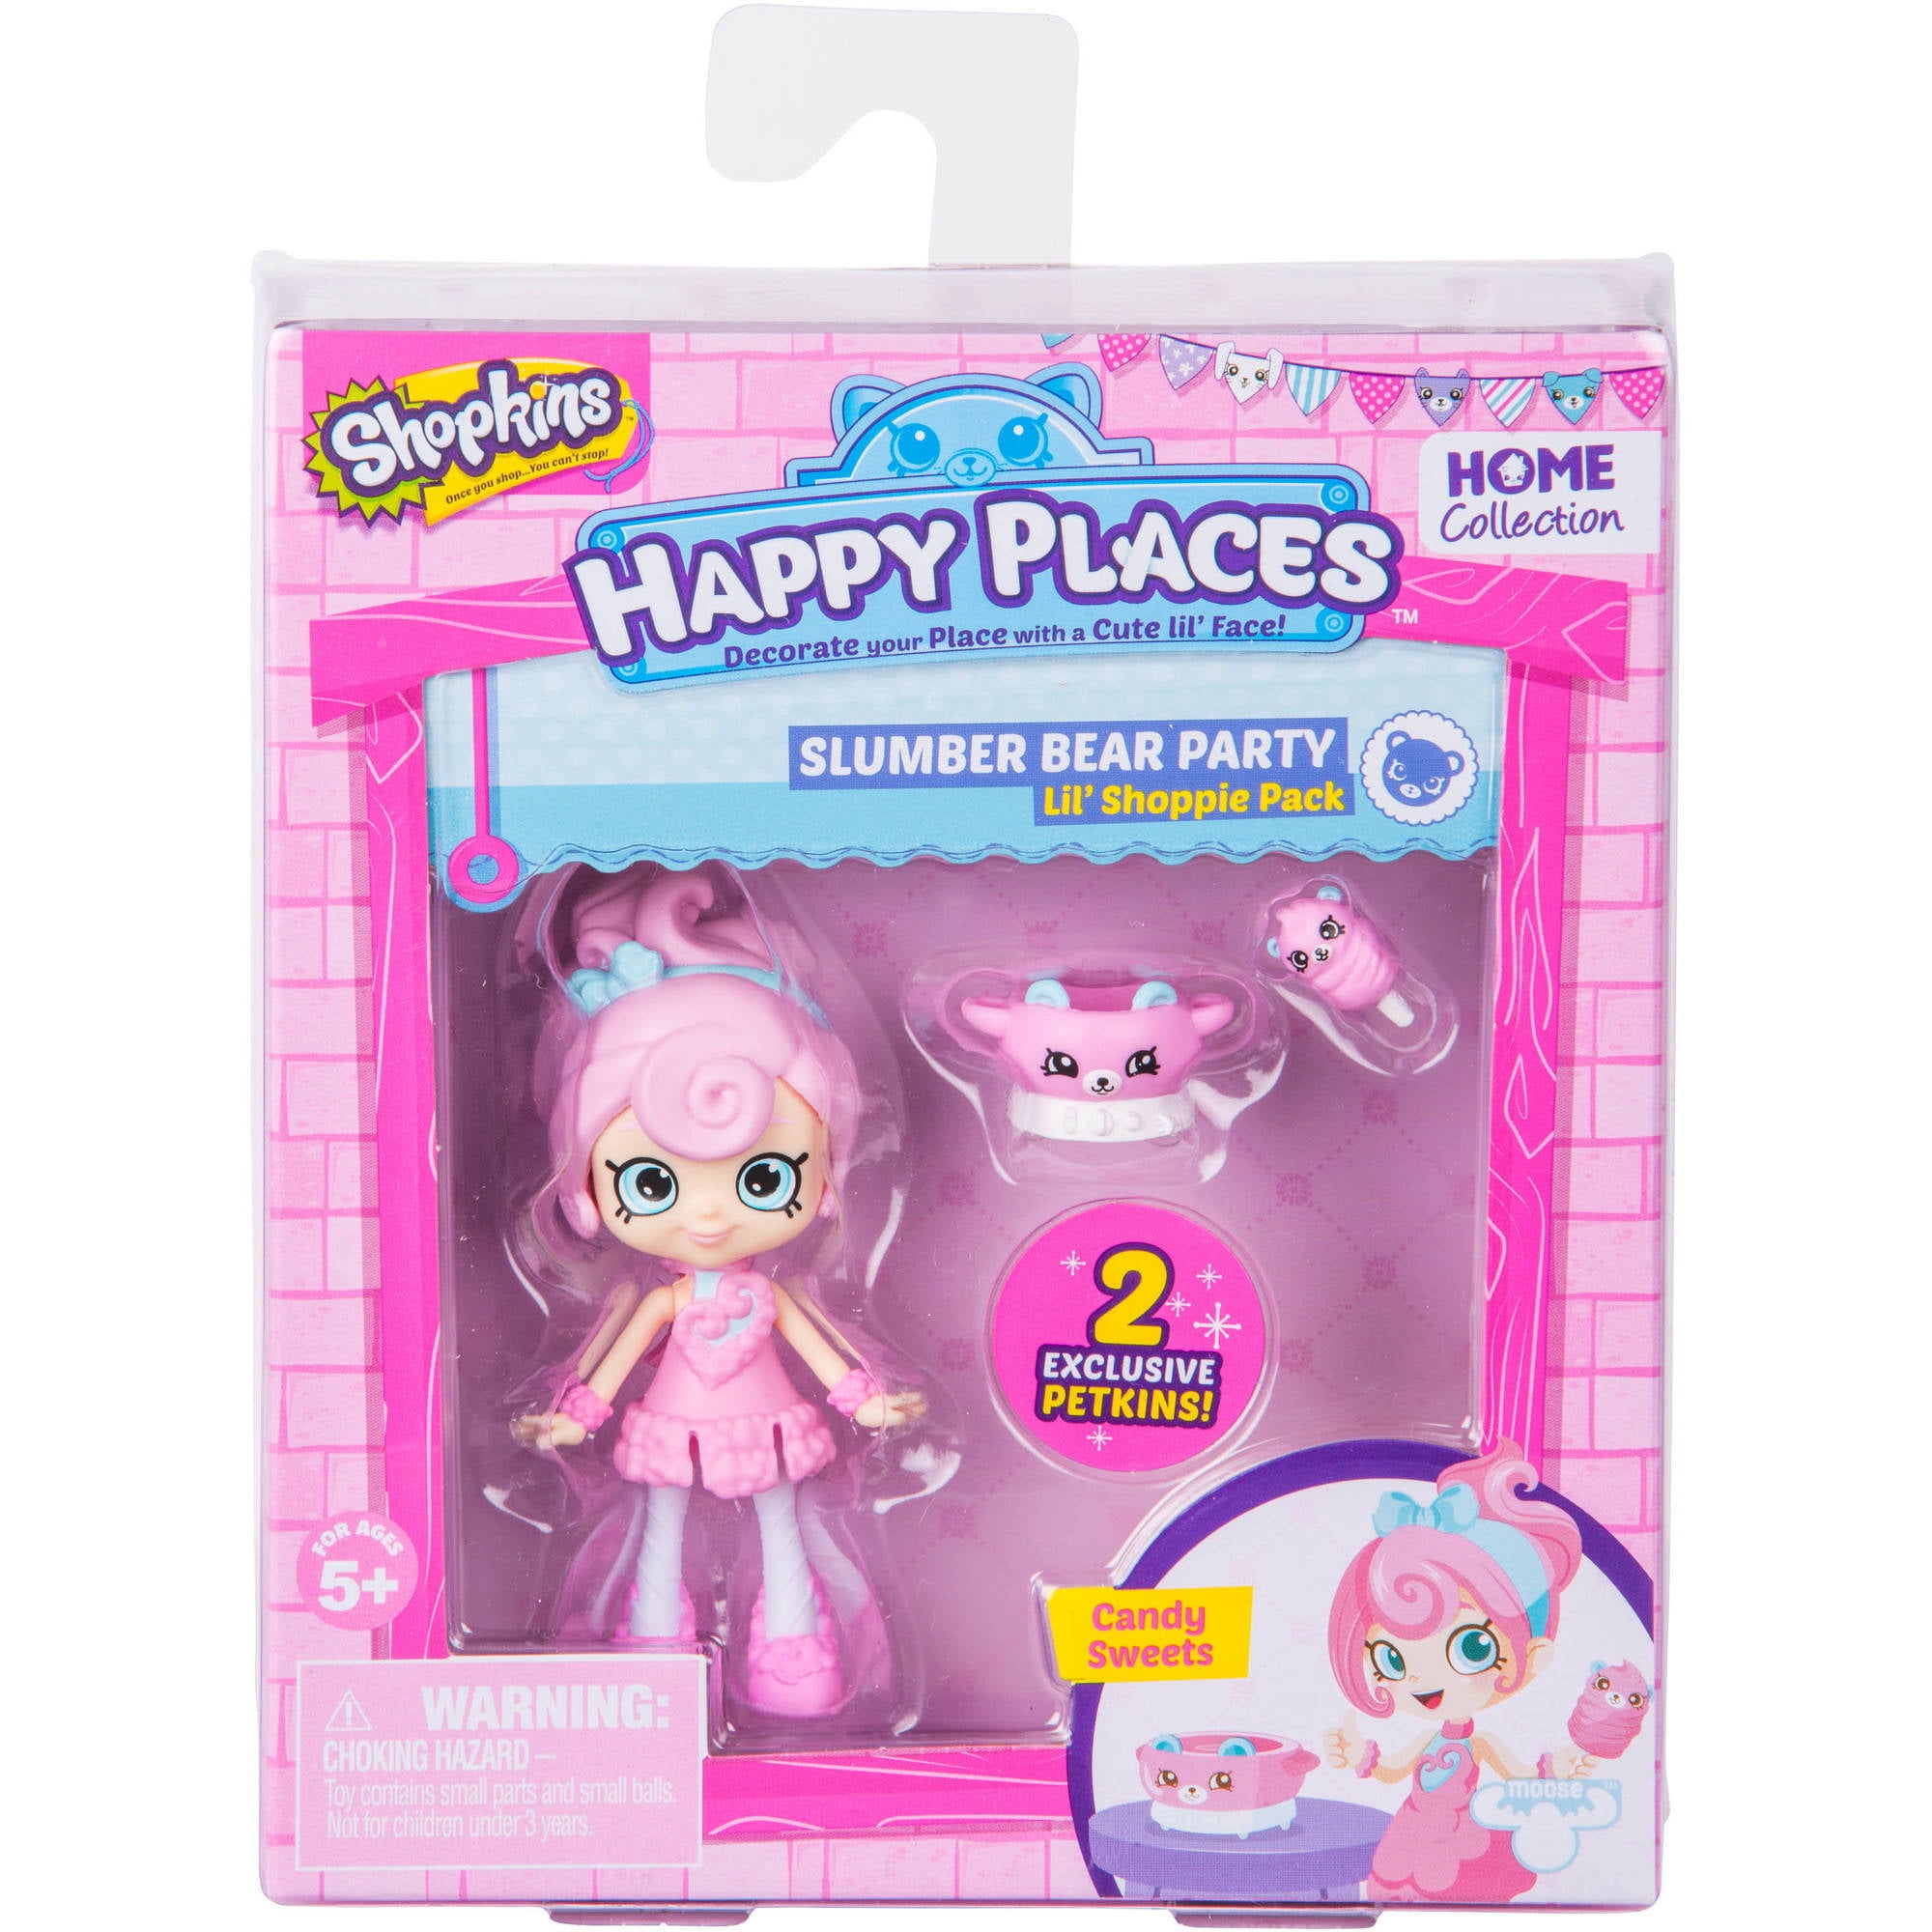 NEW Shopkins Happy Places Doll House HUGE Miniature Collection